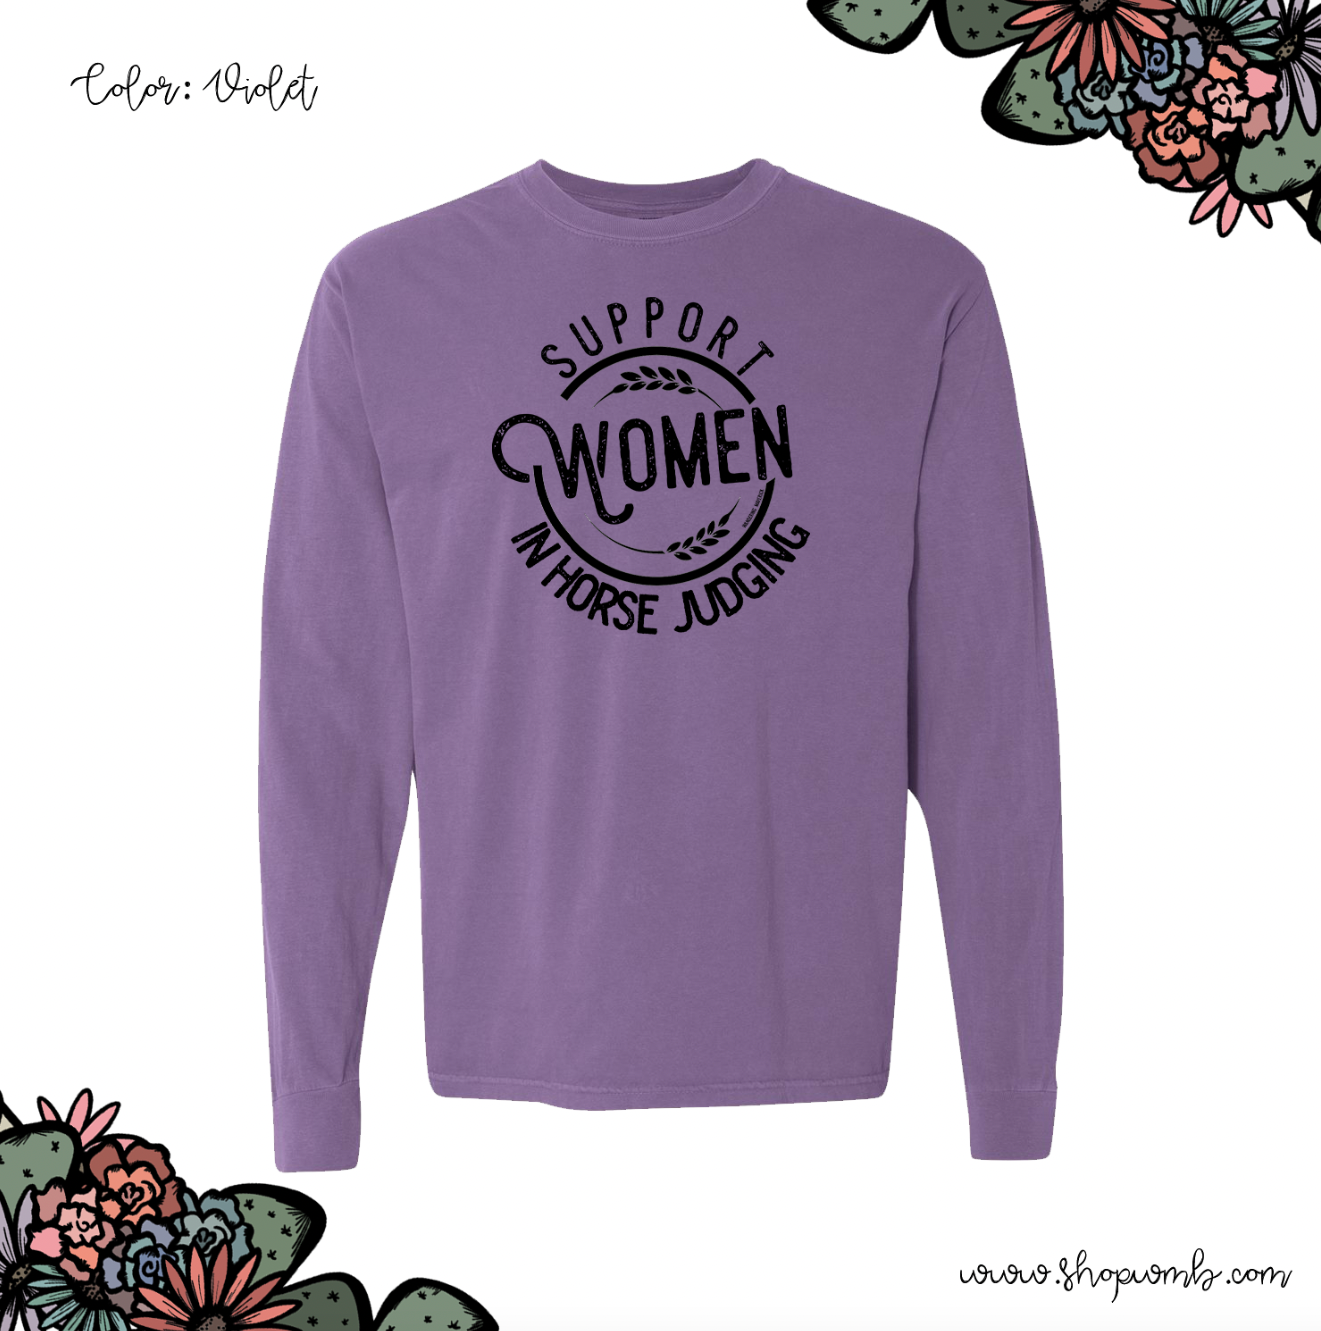 Support Women In Horse Judging LONG SLEEVE T-Shirt (S-3XL) - Multiple Colors!